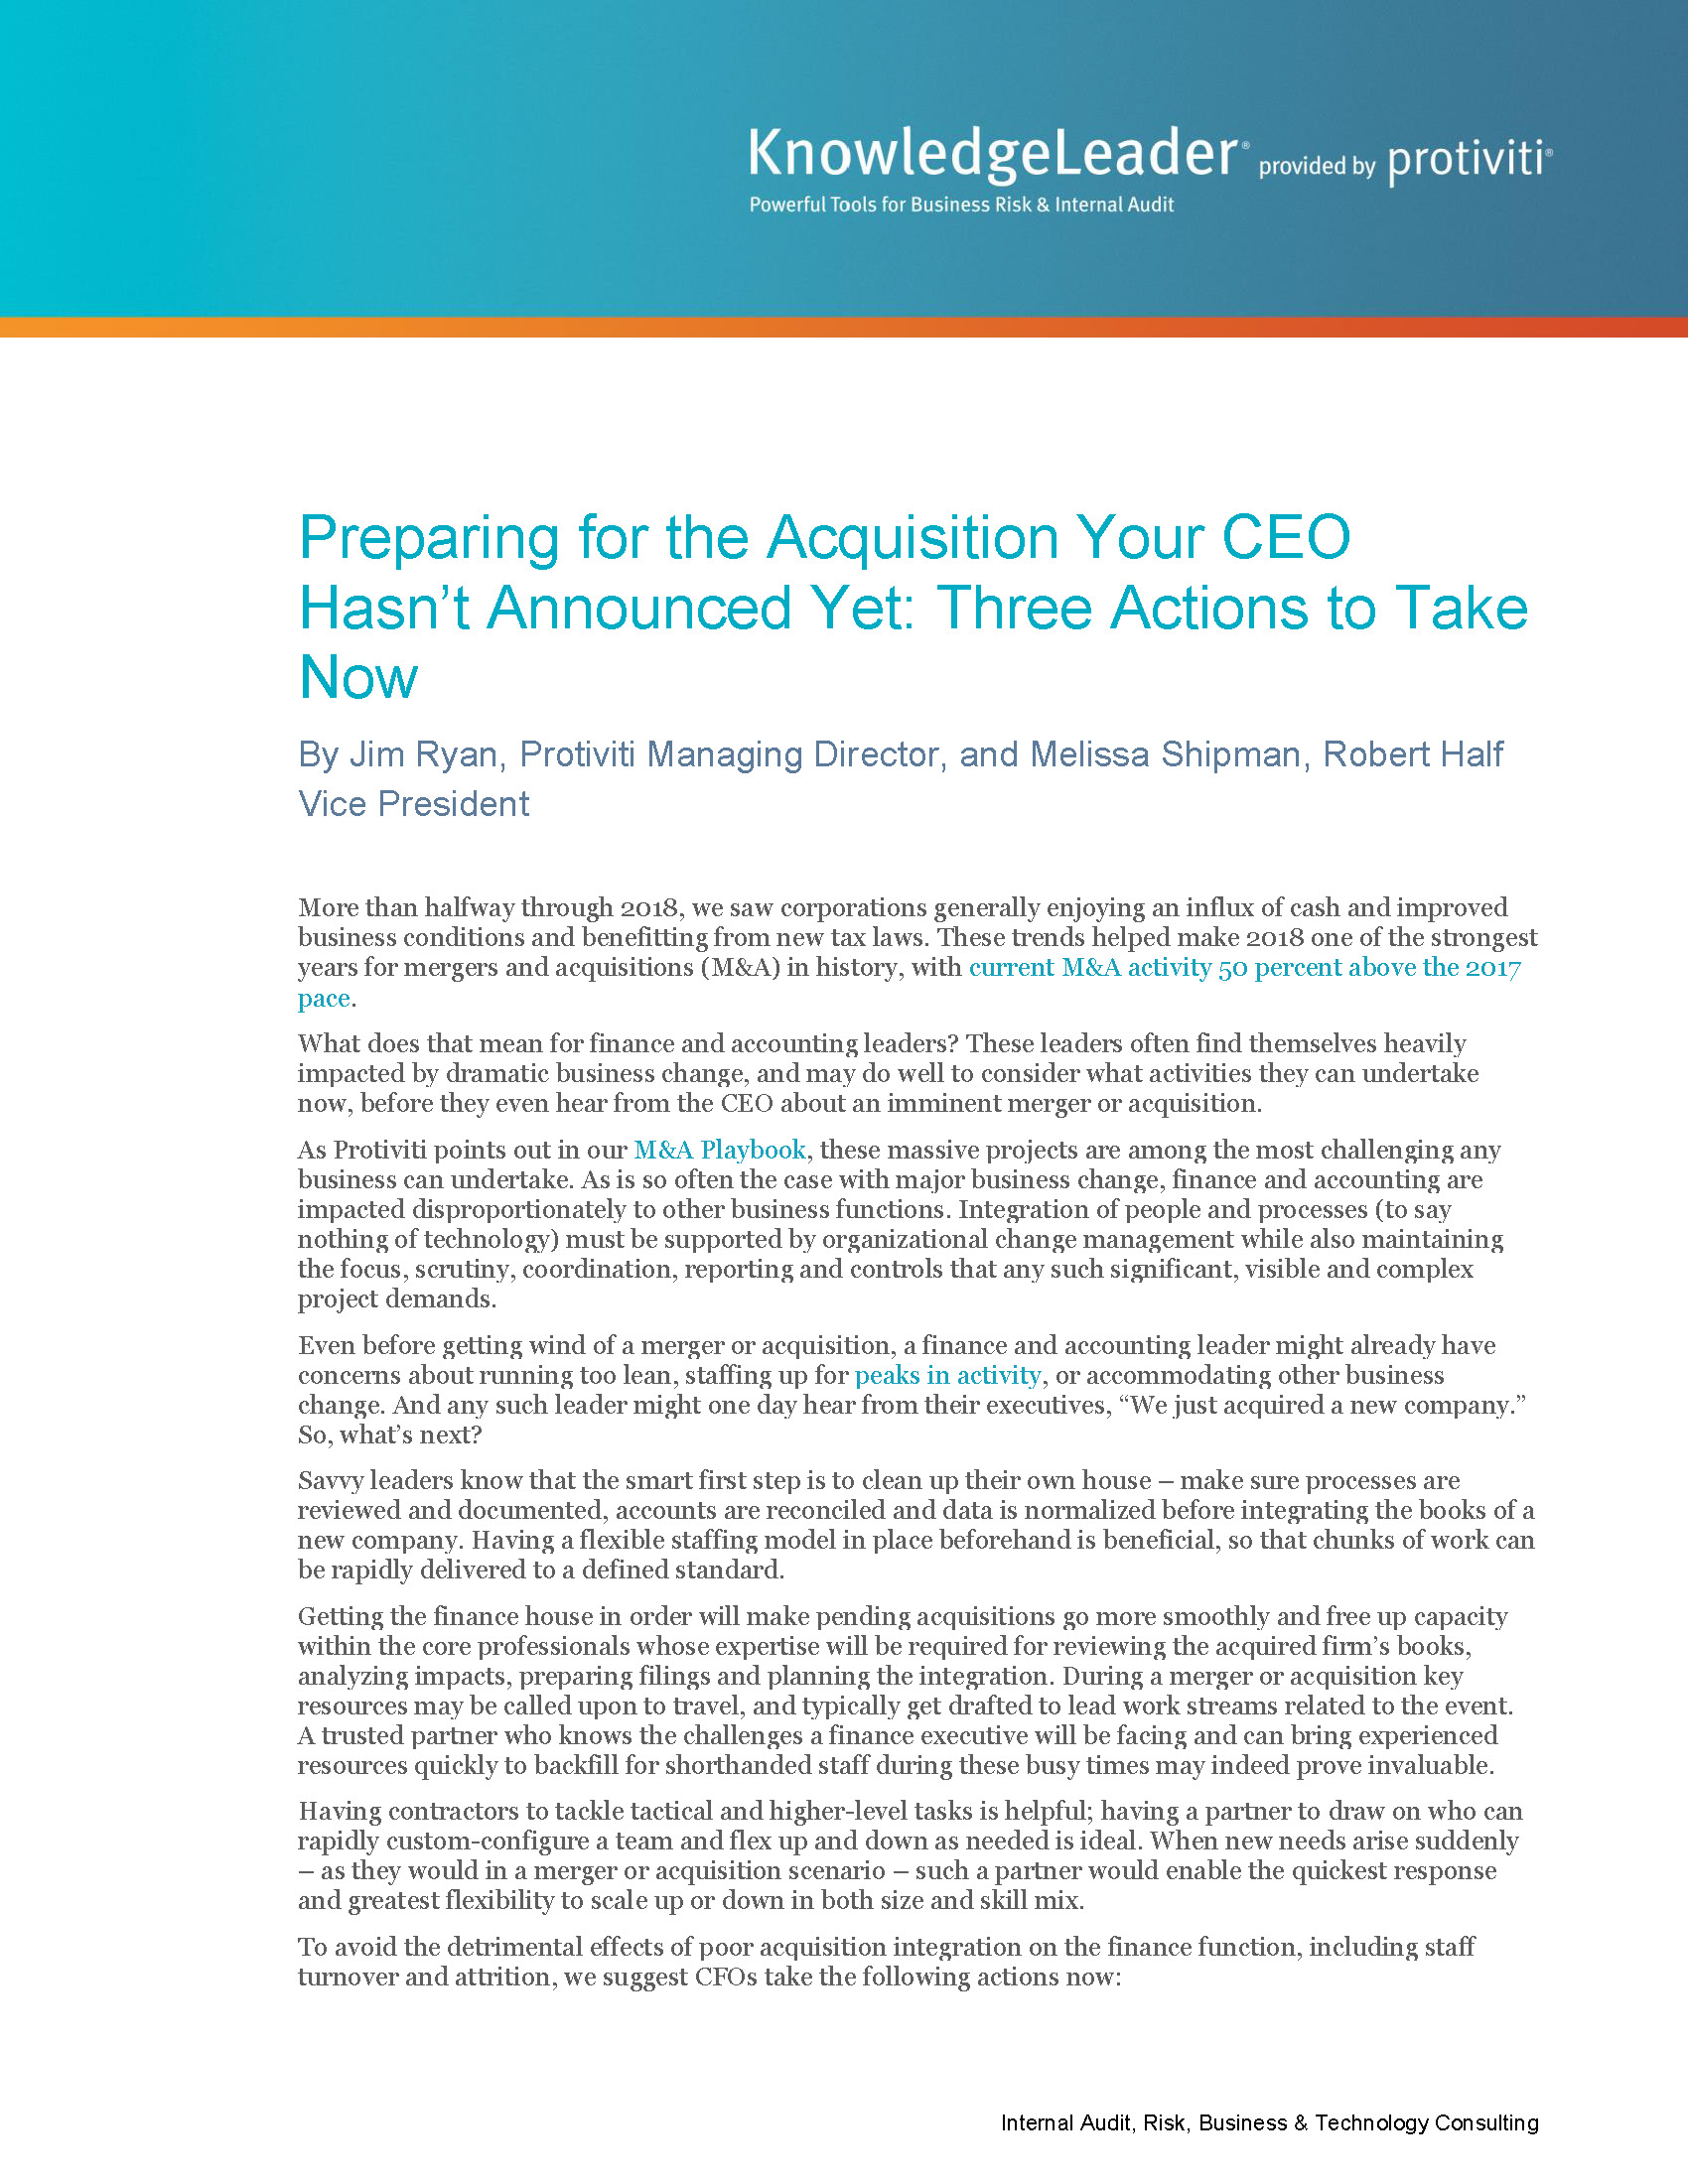 Screenshot of the first page of Preparing for the Acquisition Your CEO Hasn’t Announced Yet Three Actions to Take Now